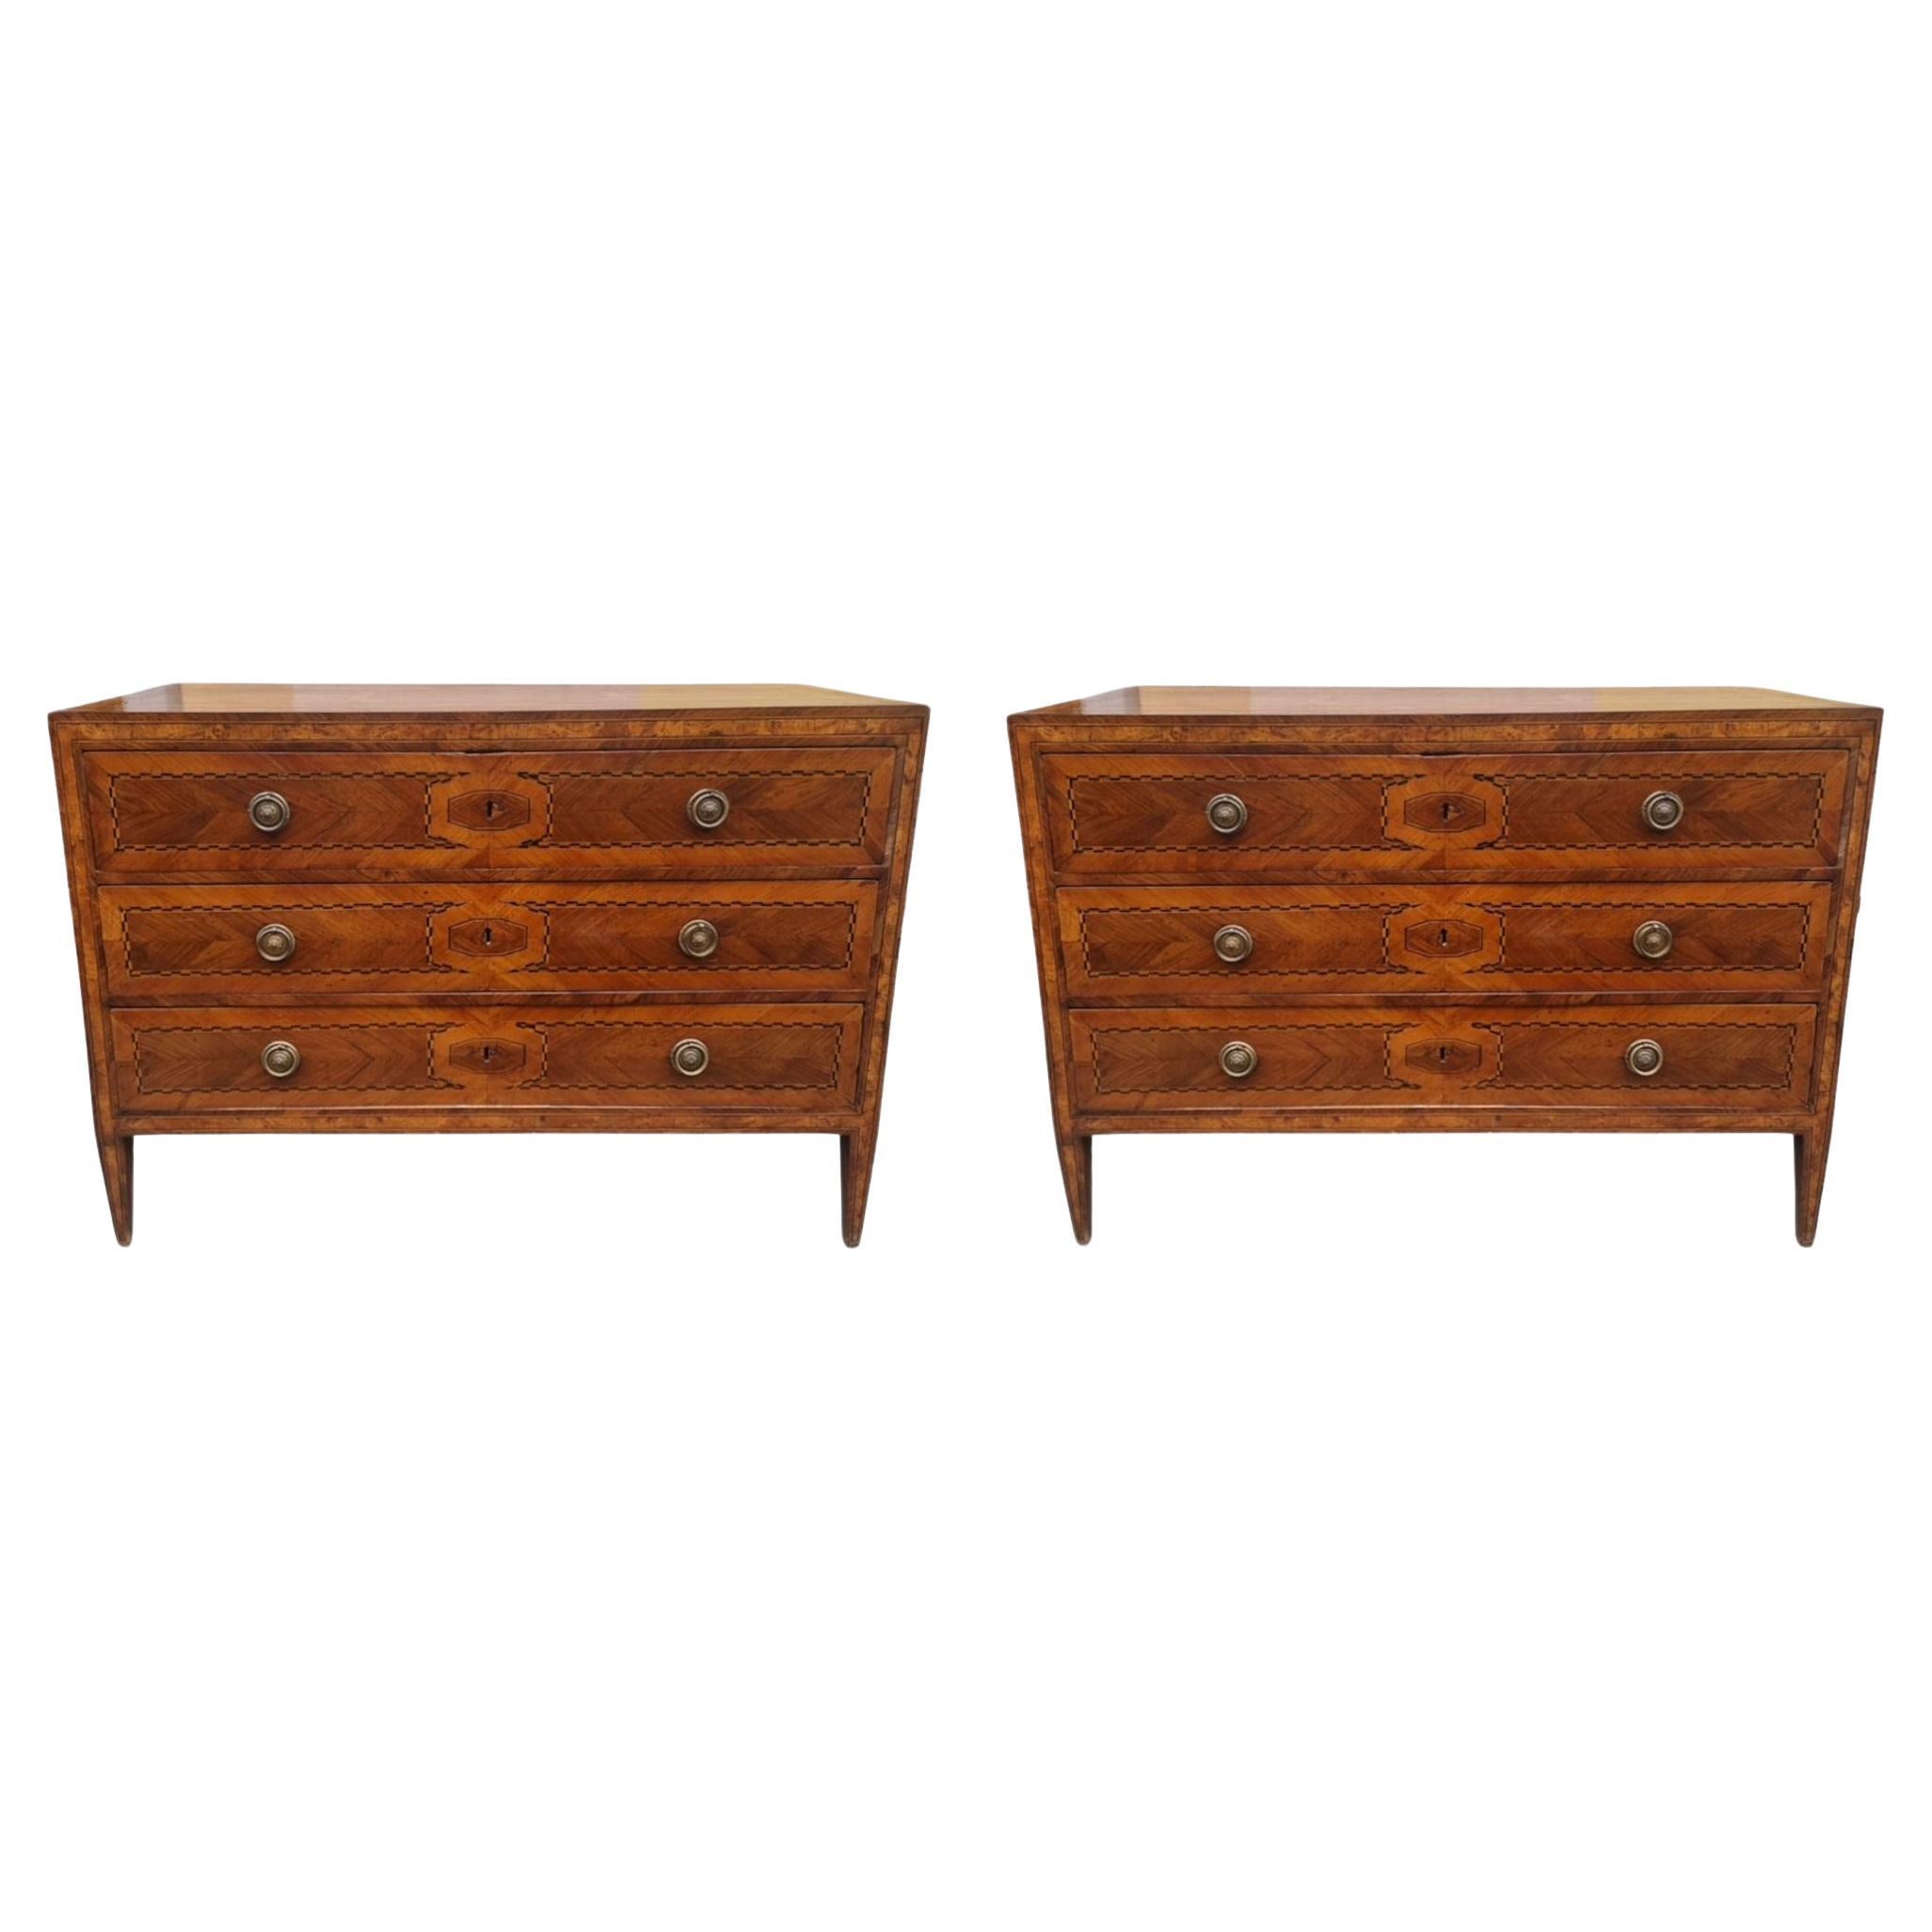  Pair of Louis XVI chests of drawers